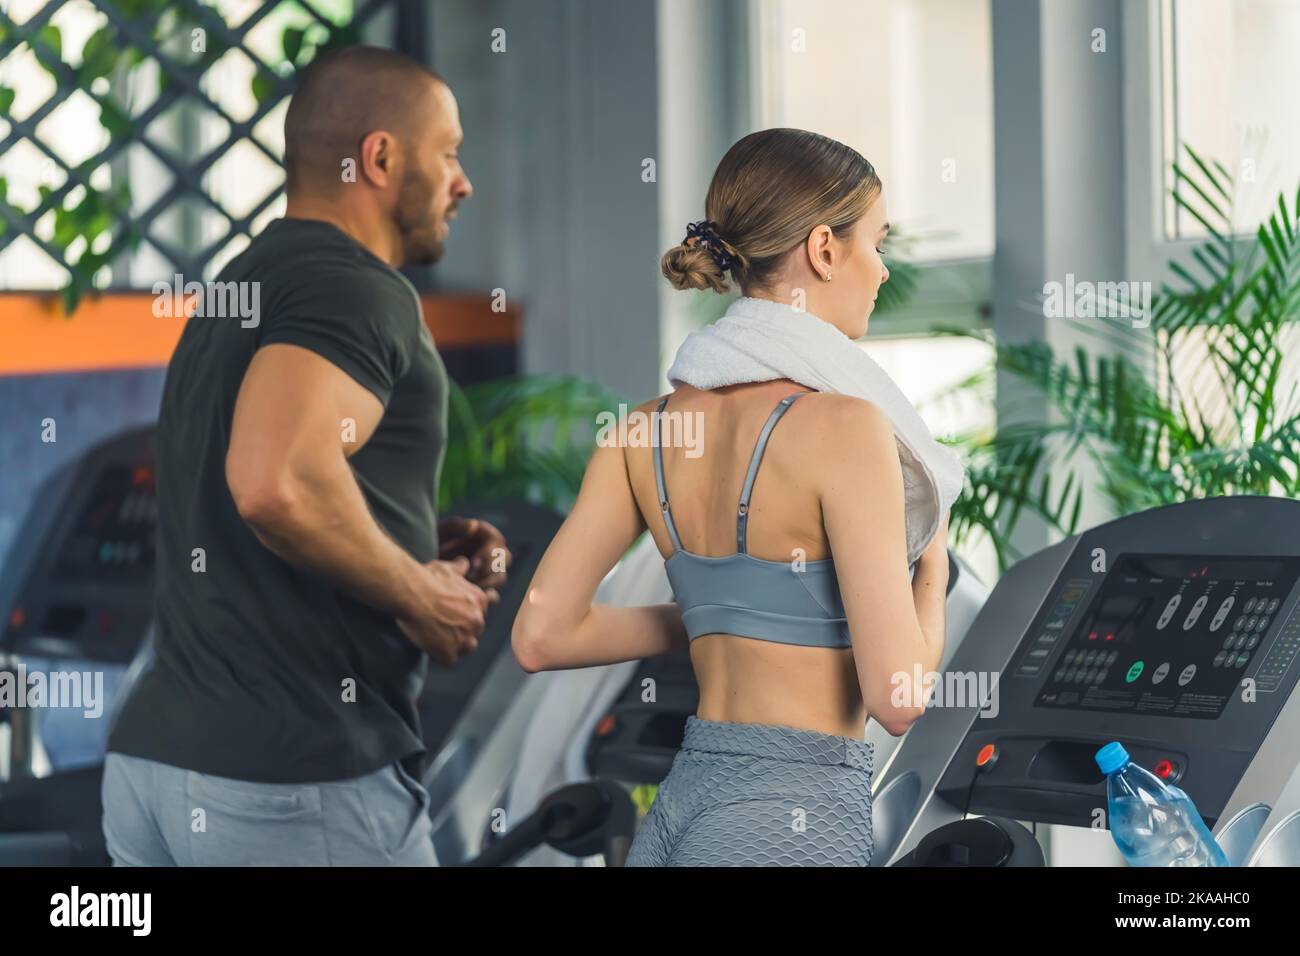 Cardio workout at nearby gym. Two caucasian people - muscular man in his late 30s and young skinny girl - running on modern treadmills. Gym interior. High quality photo Stock Photo